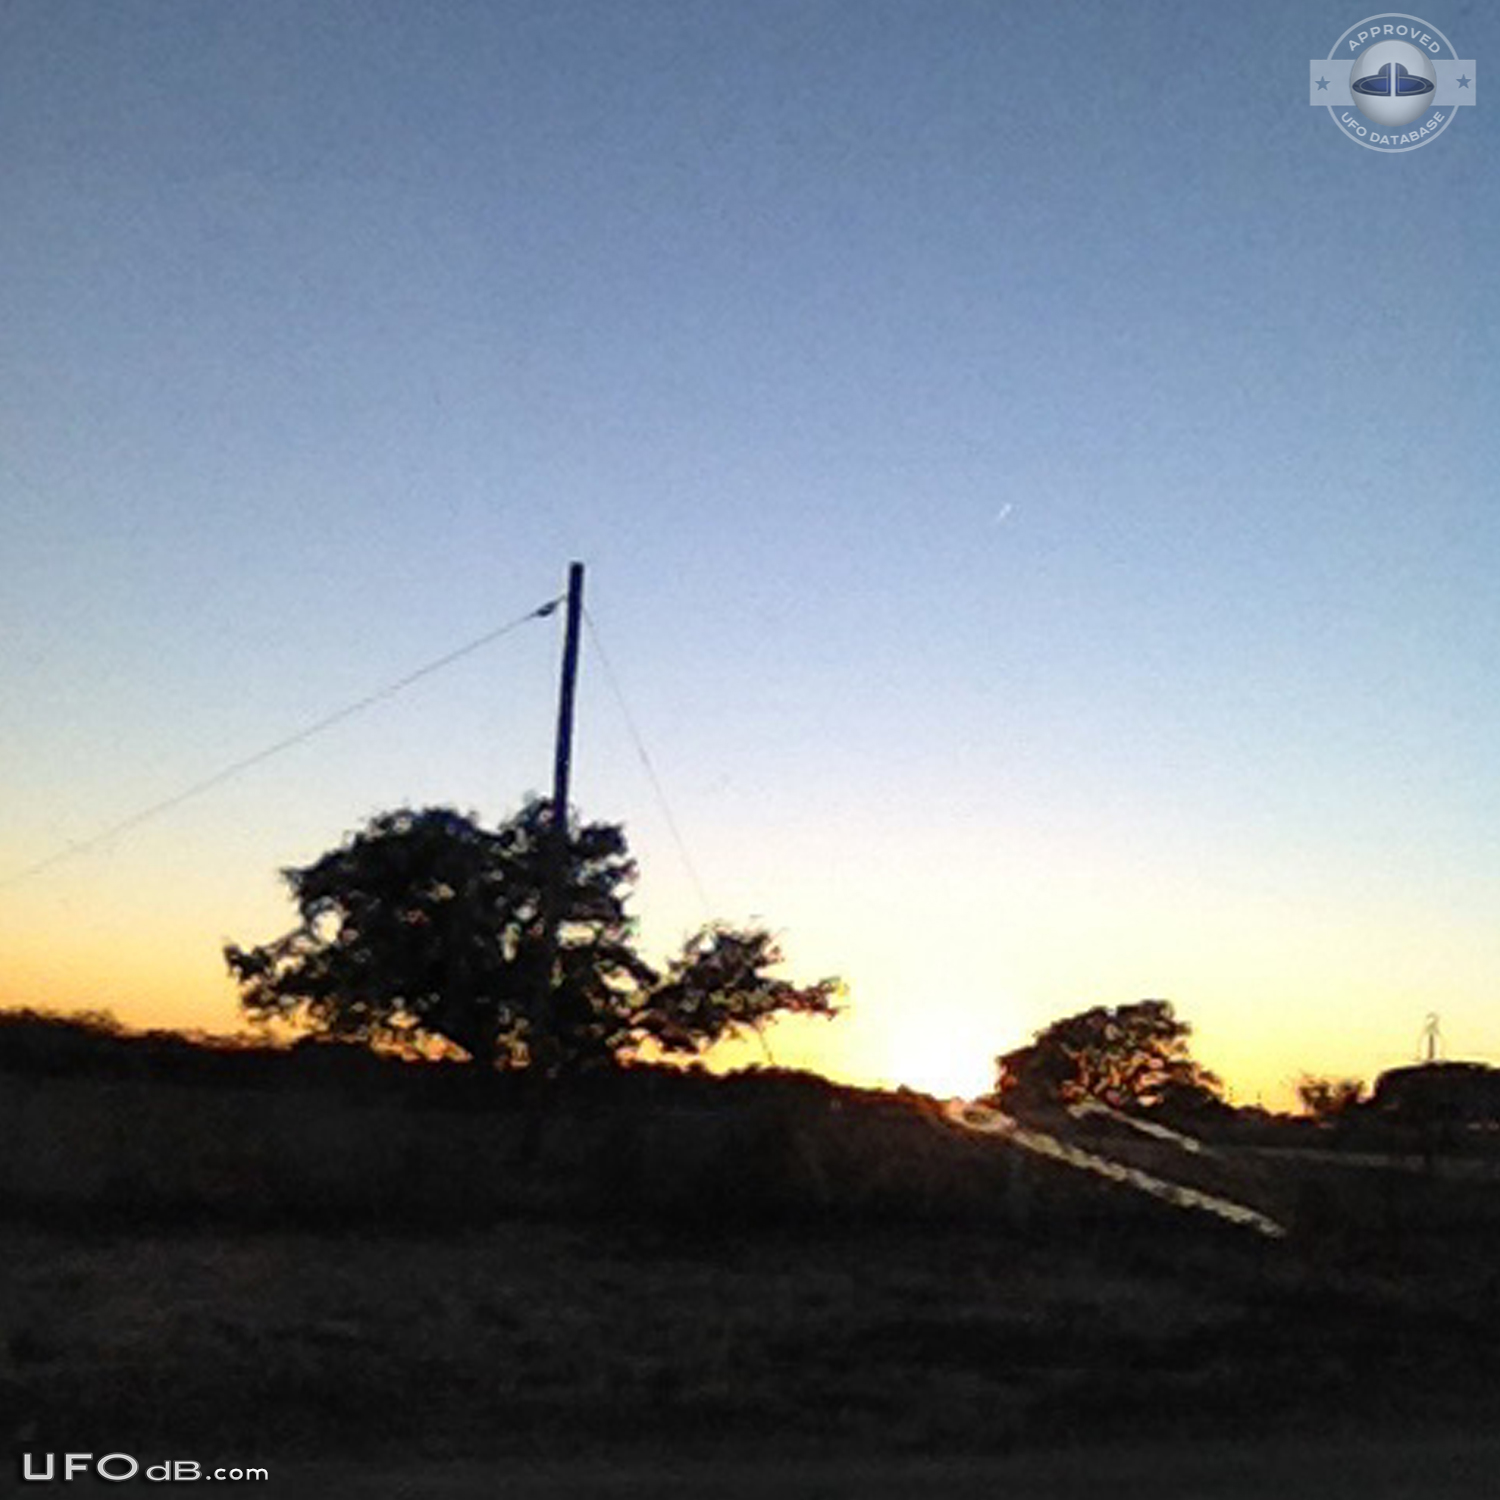 Very Reflective Sphere UFO caught on picture in Boerne, Texas 2013 UFO Picture #557-3